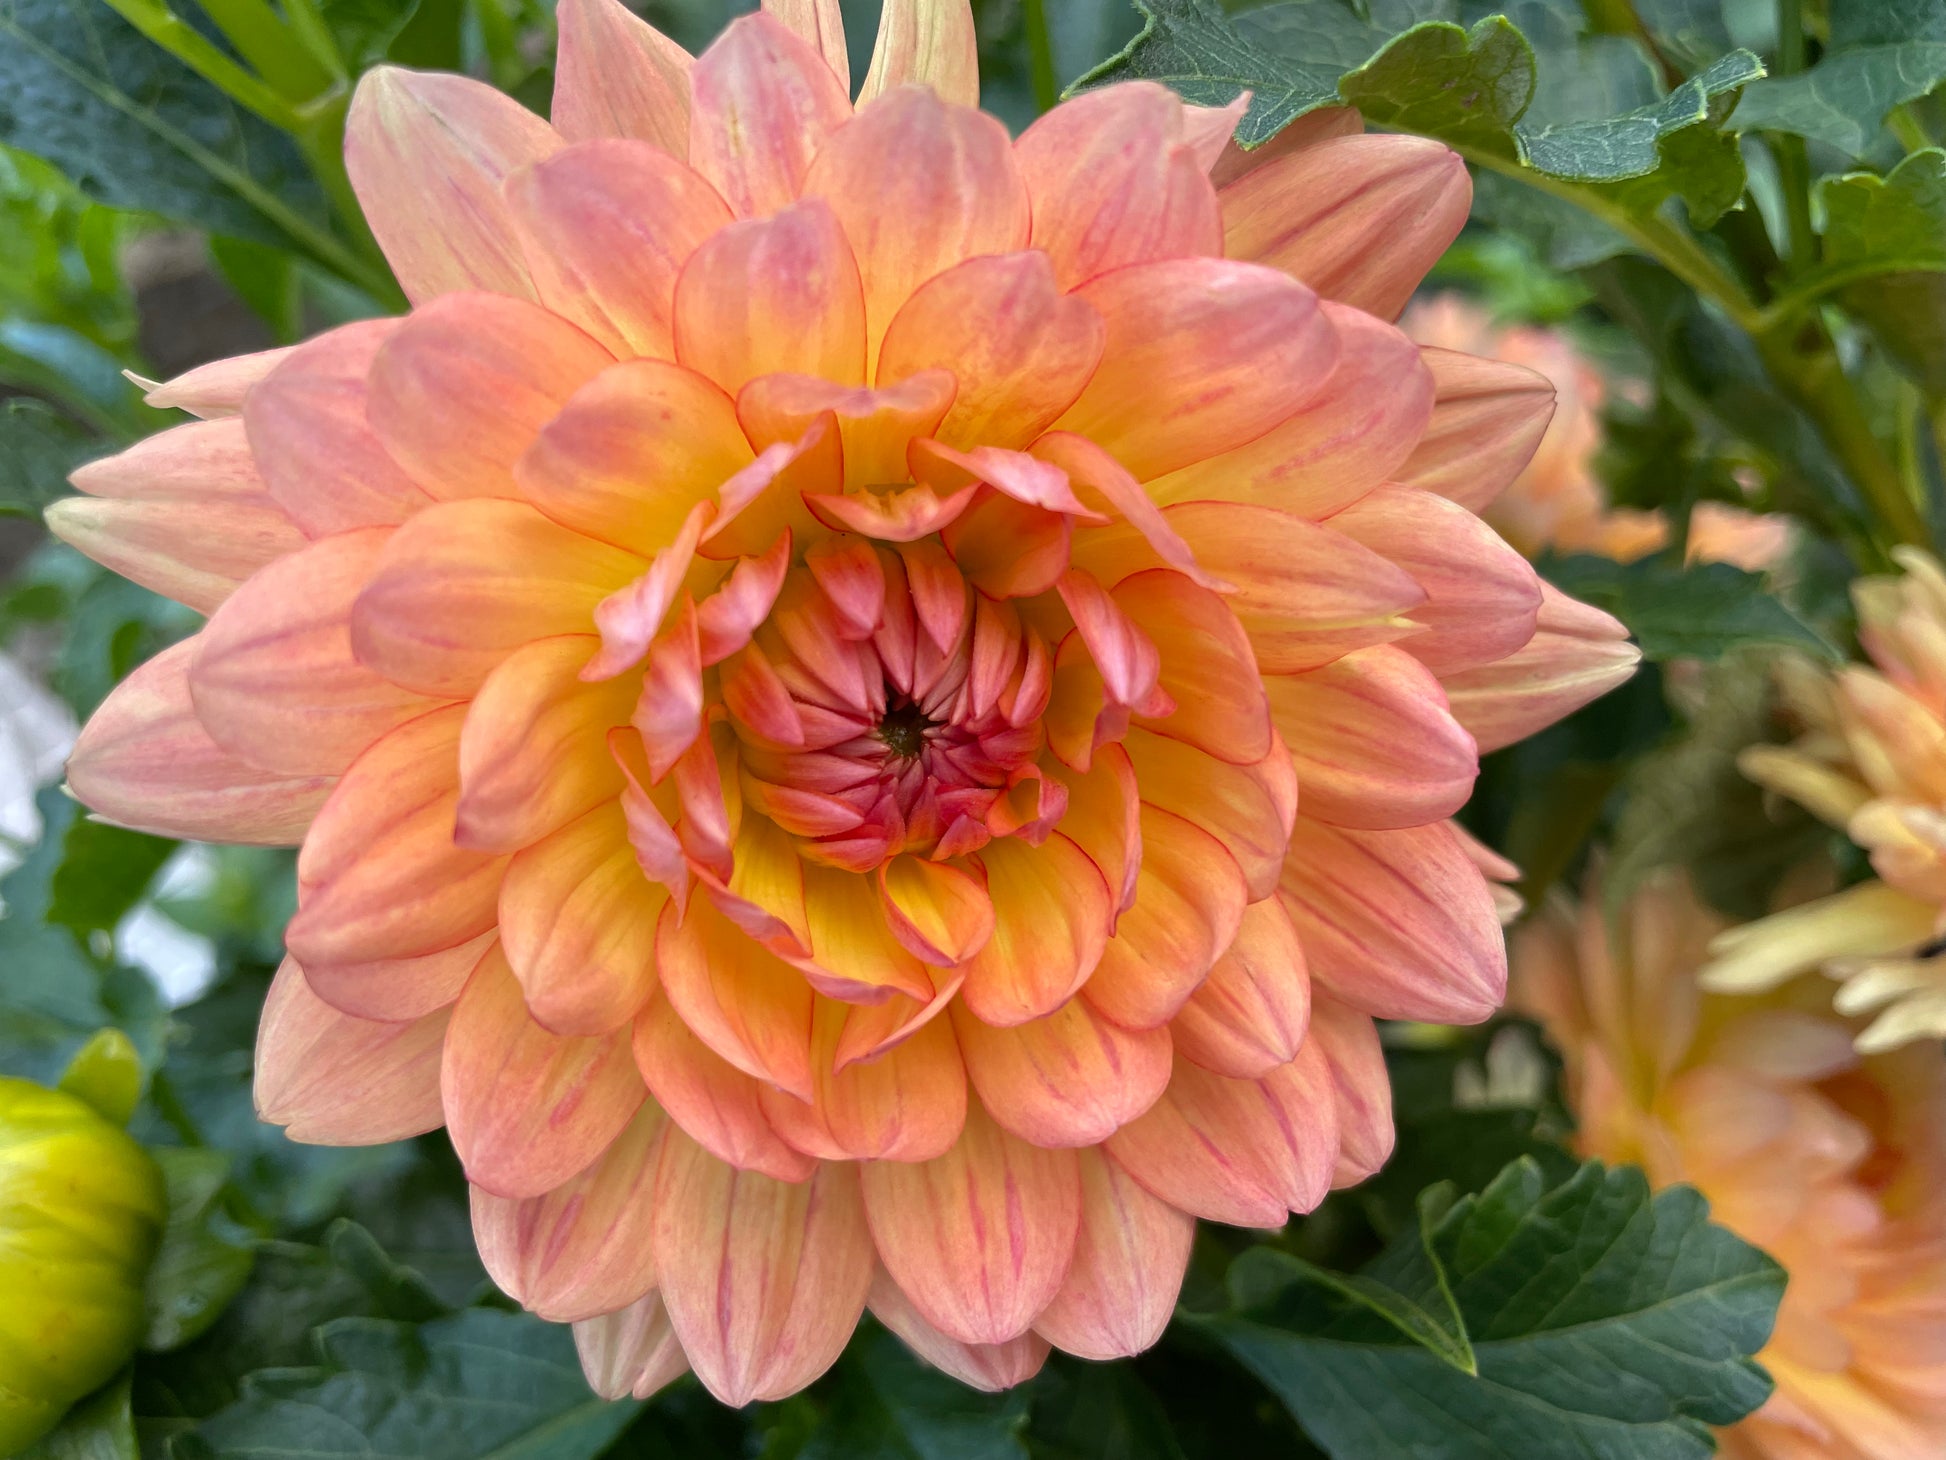 Waterlily dahlia "Gabrielle Marie" opening its' petals.  Coral pink.  Cupped petals like a peony or English rose.